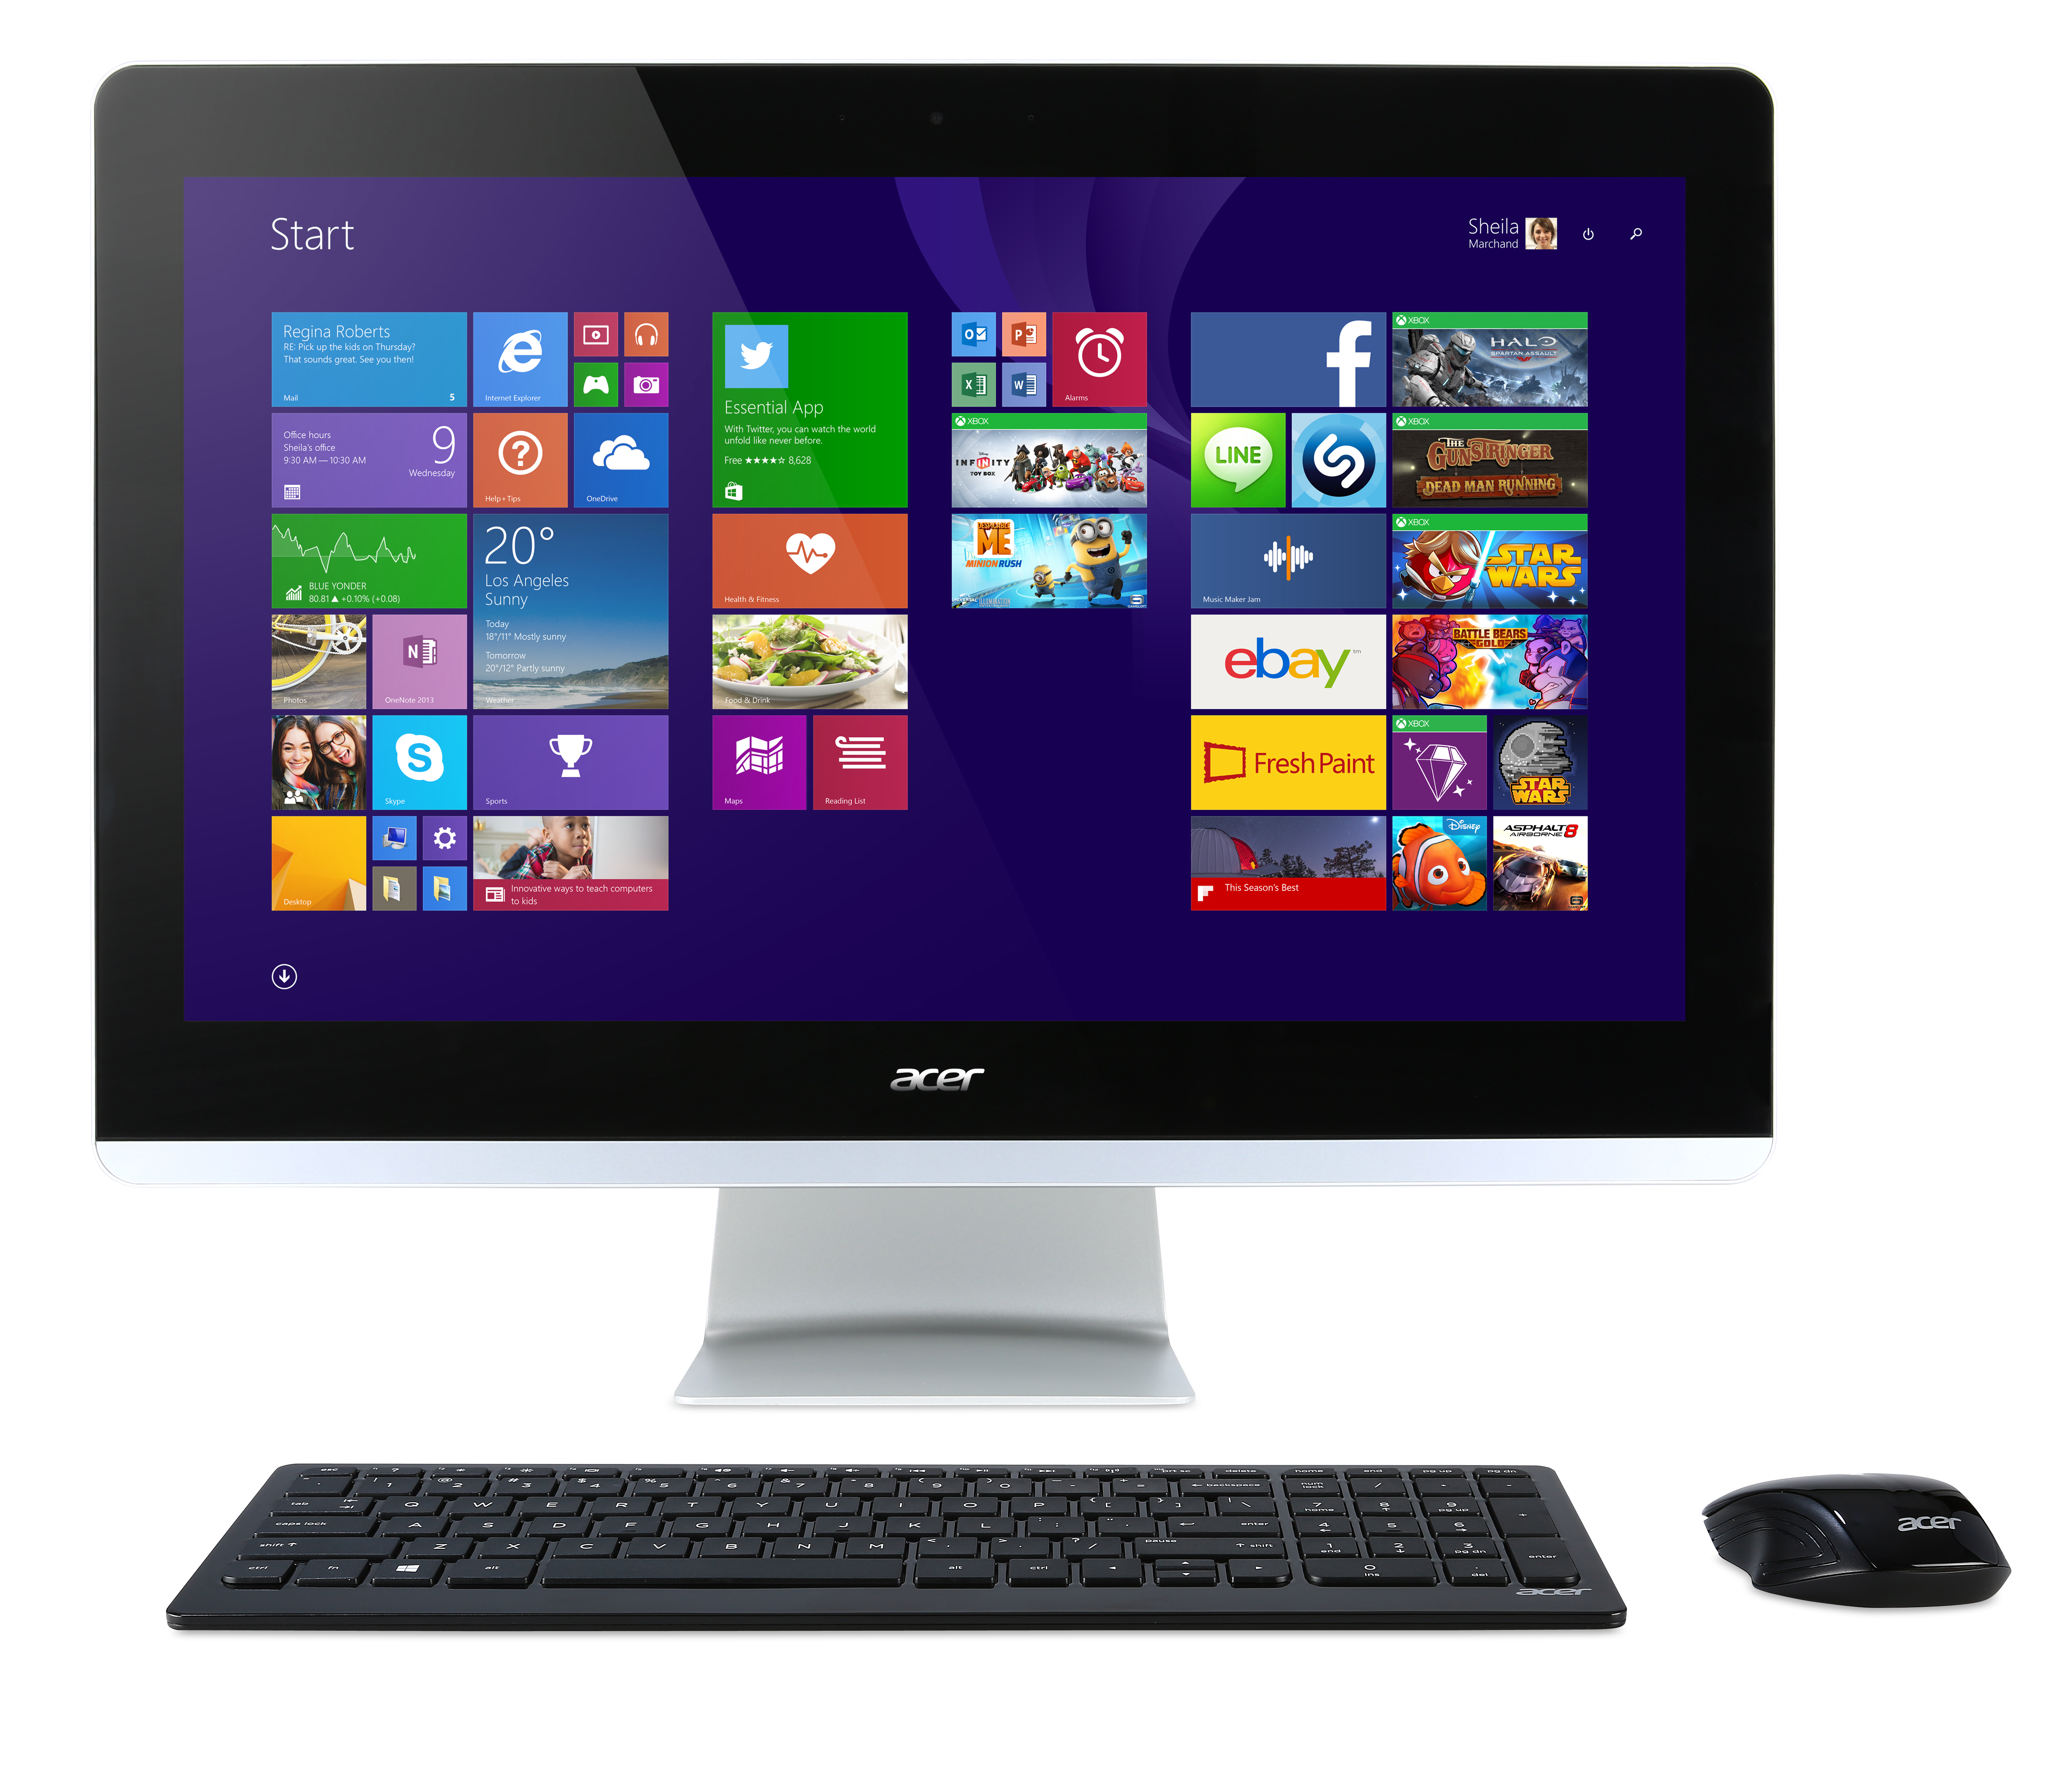 Molesto Medieval interferencia Specs Acer Aspire Z3-711 Intel® Core™ i3 60.5 cm (23.8") 1920 x 1080 pixels  4 GB DDR3L-SDRAM 500 GB HDD All-in-One PC Windows 10 Home Silver All-in-One  PCs/Workstations (DQ.B0AEH.001)